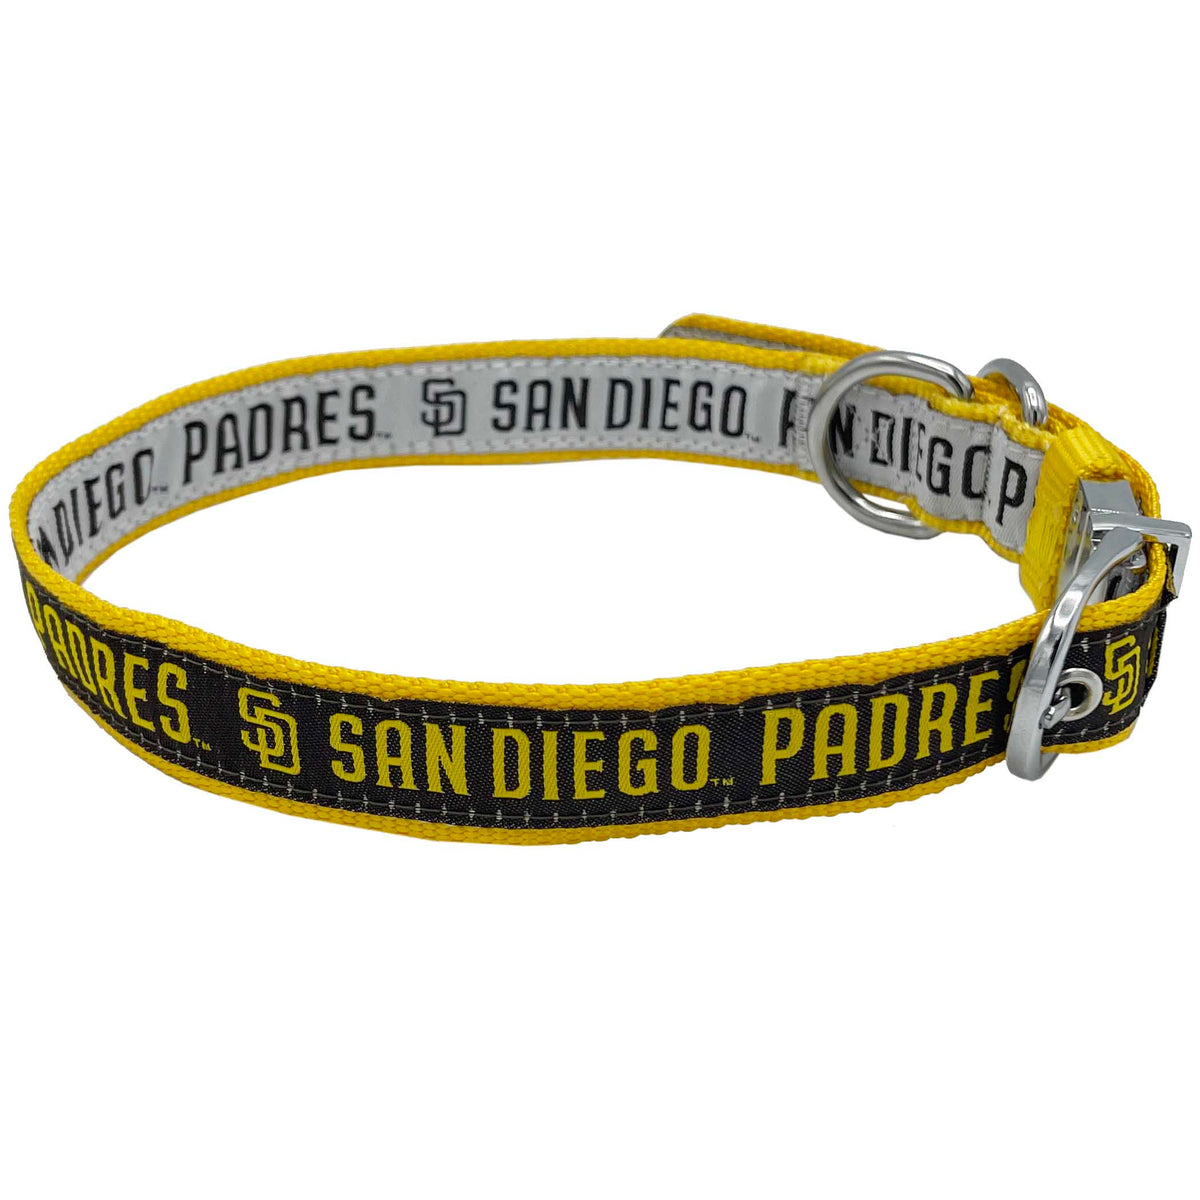 San Diego Padres Reversible Dog Collar - 3 Red Rovers